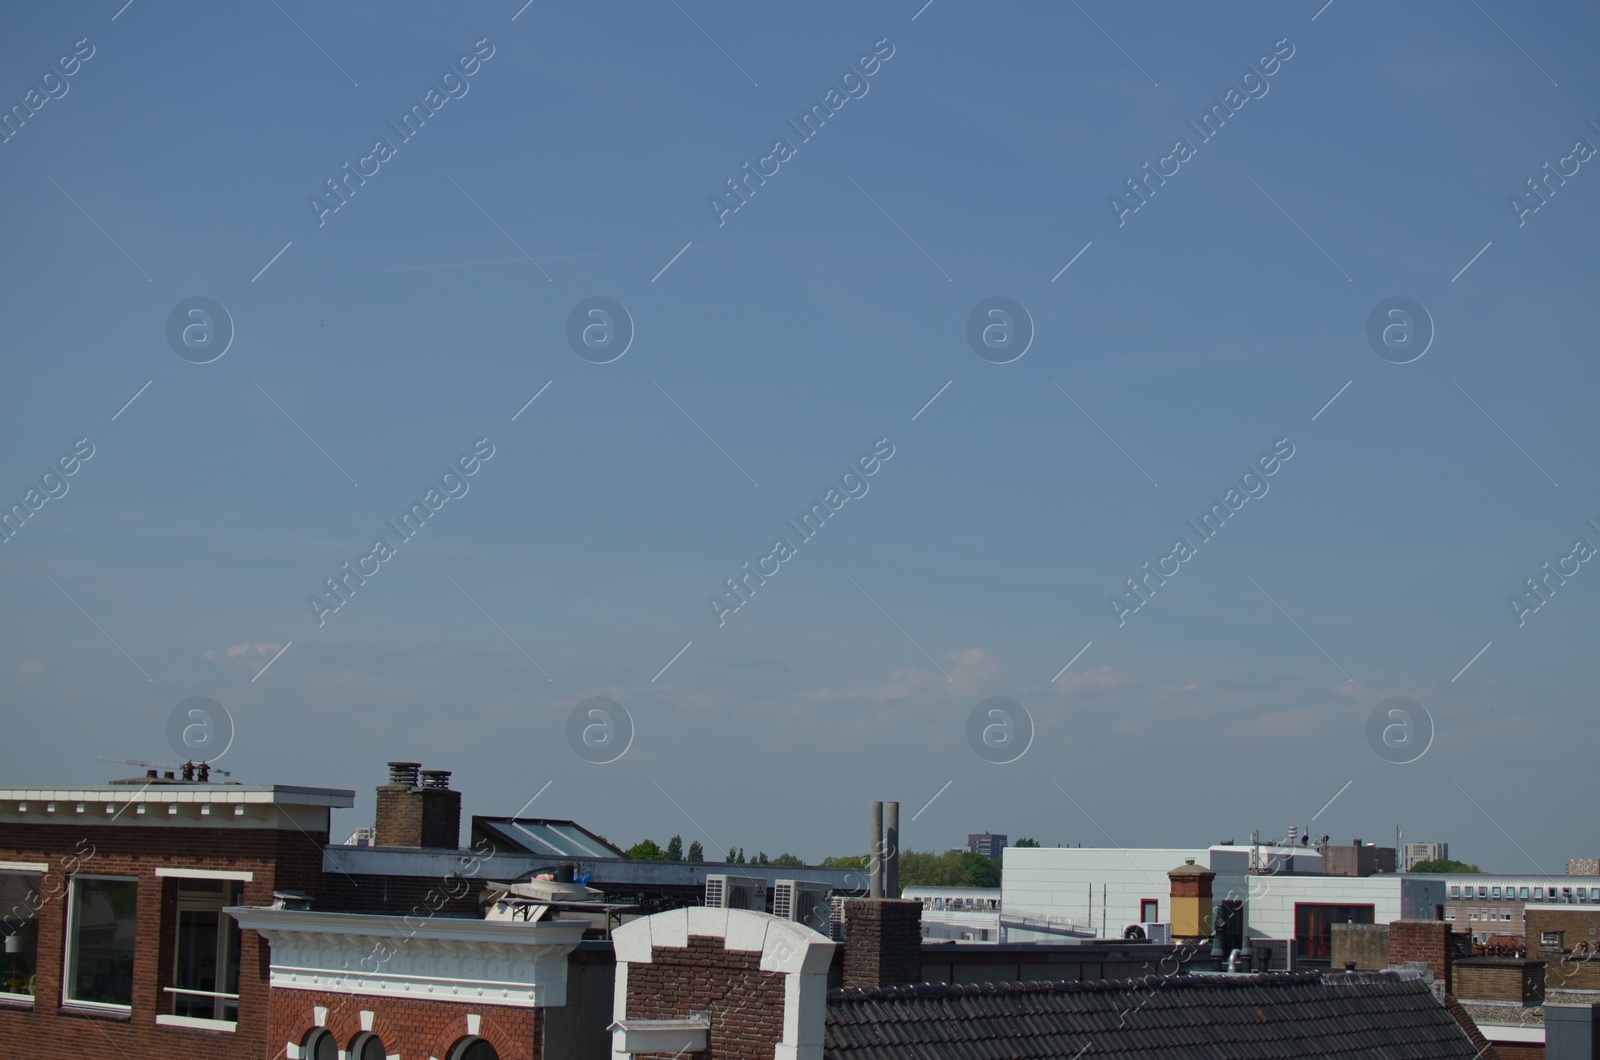 Photo of Picturesque view of city with beautiful buildings under blue sky